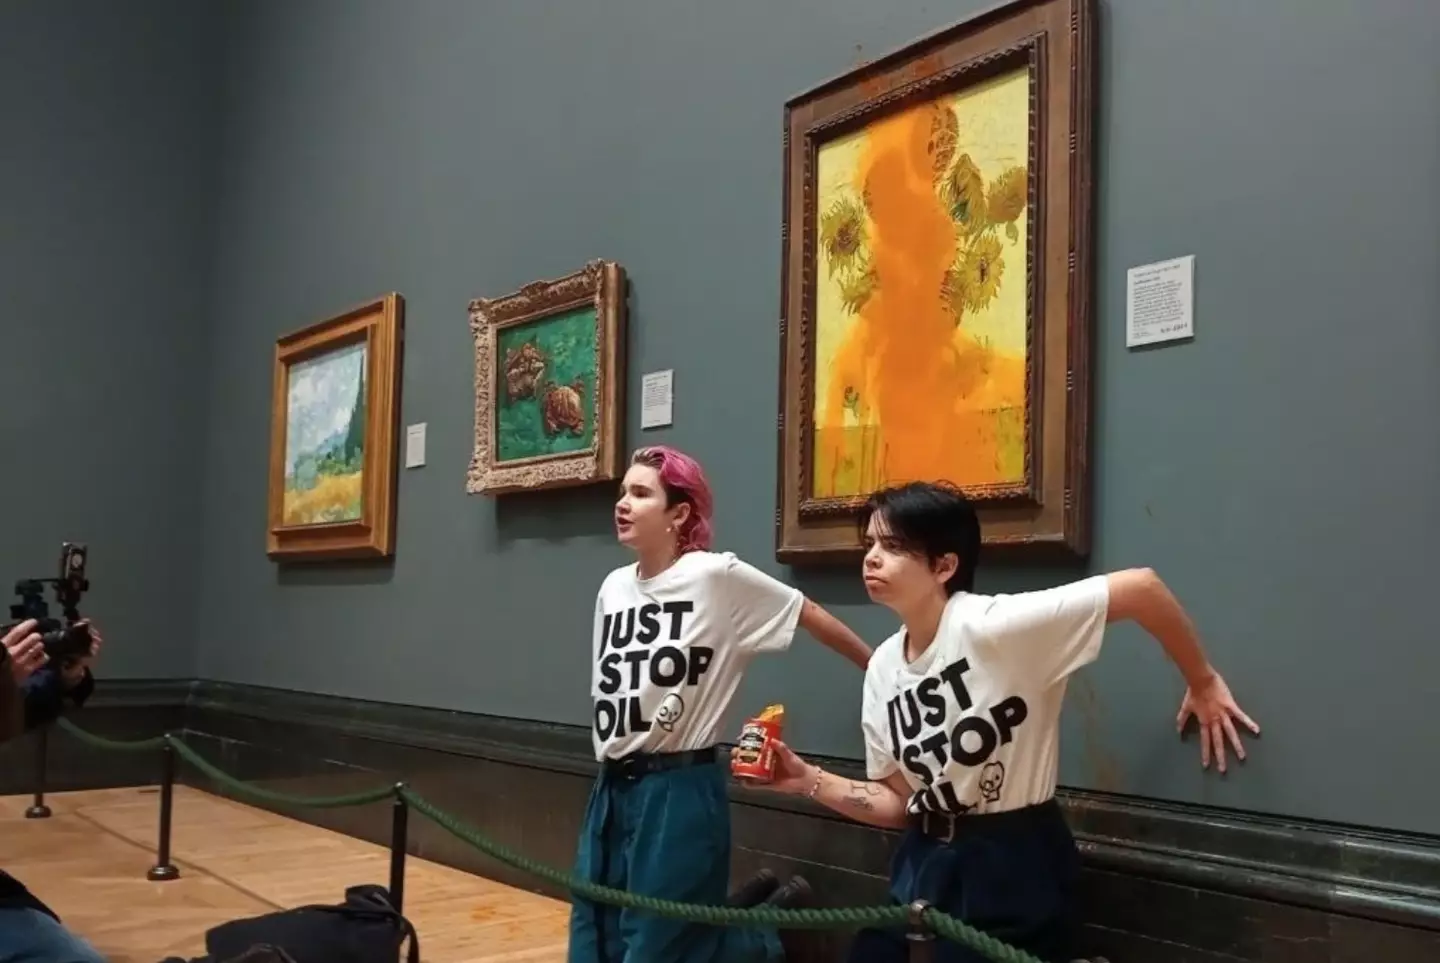 Earlier this month, Just Stop Oil made headlines after protestors threw soup over a valuable Van Gogh painting.